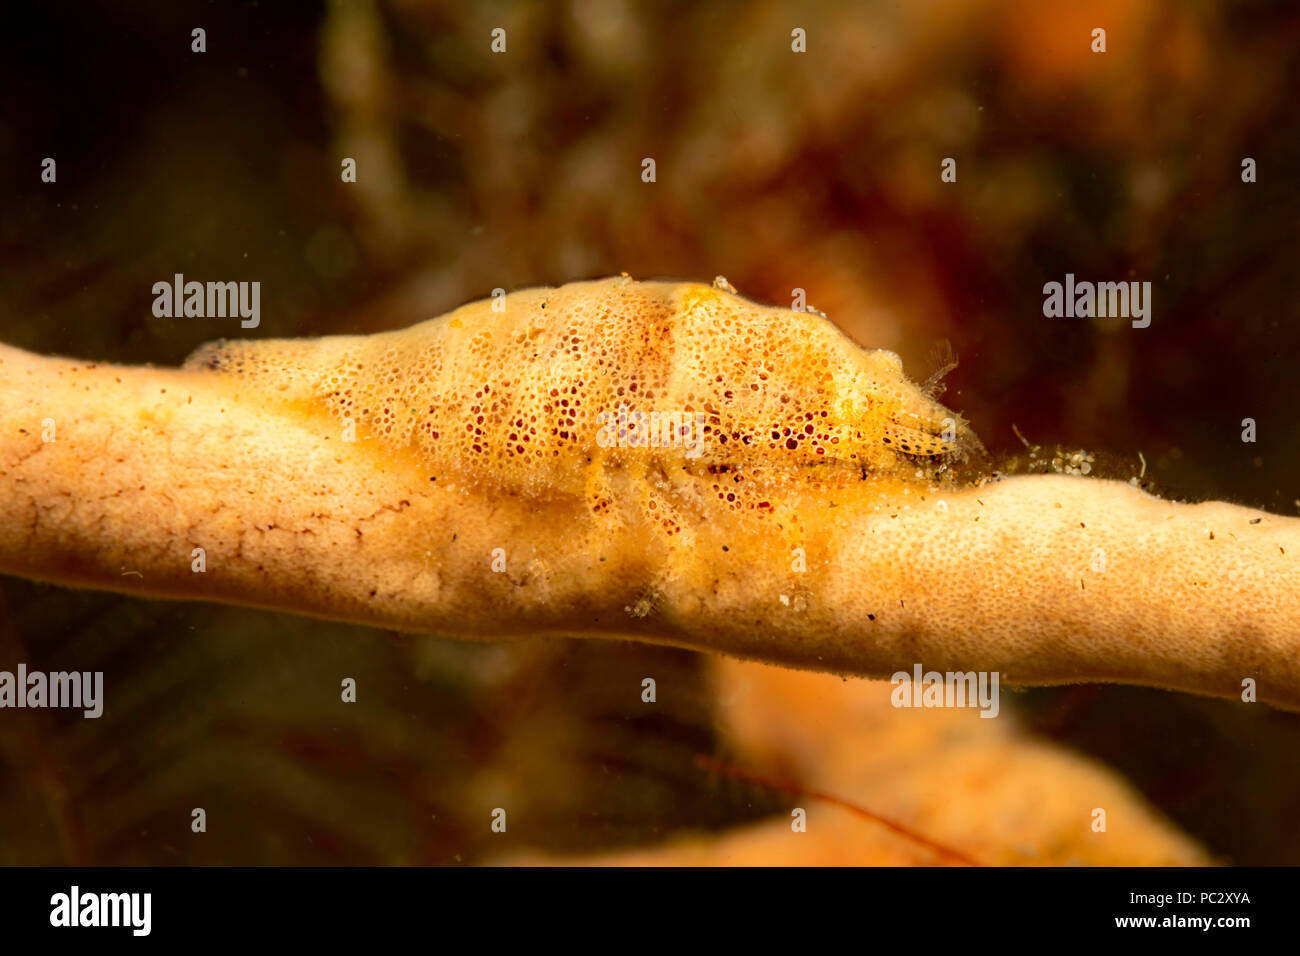 The cryptic sponge shrimp, Gelastocaris paronae, is also known as a Paron shrimp. It lives on sponges which it matches perfectly and varies in color t Stock Photo